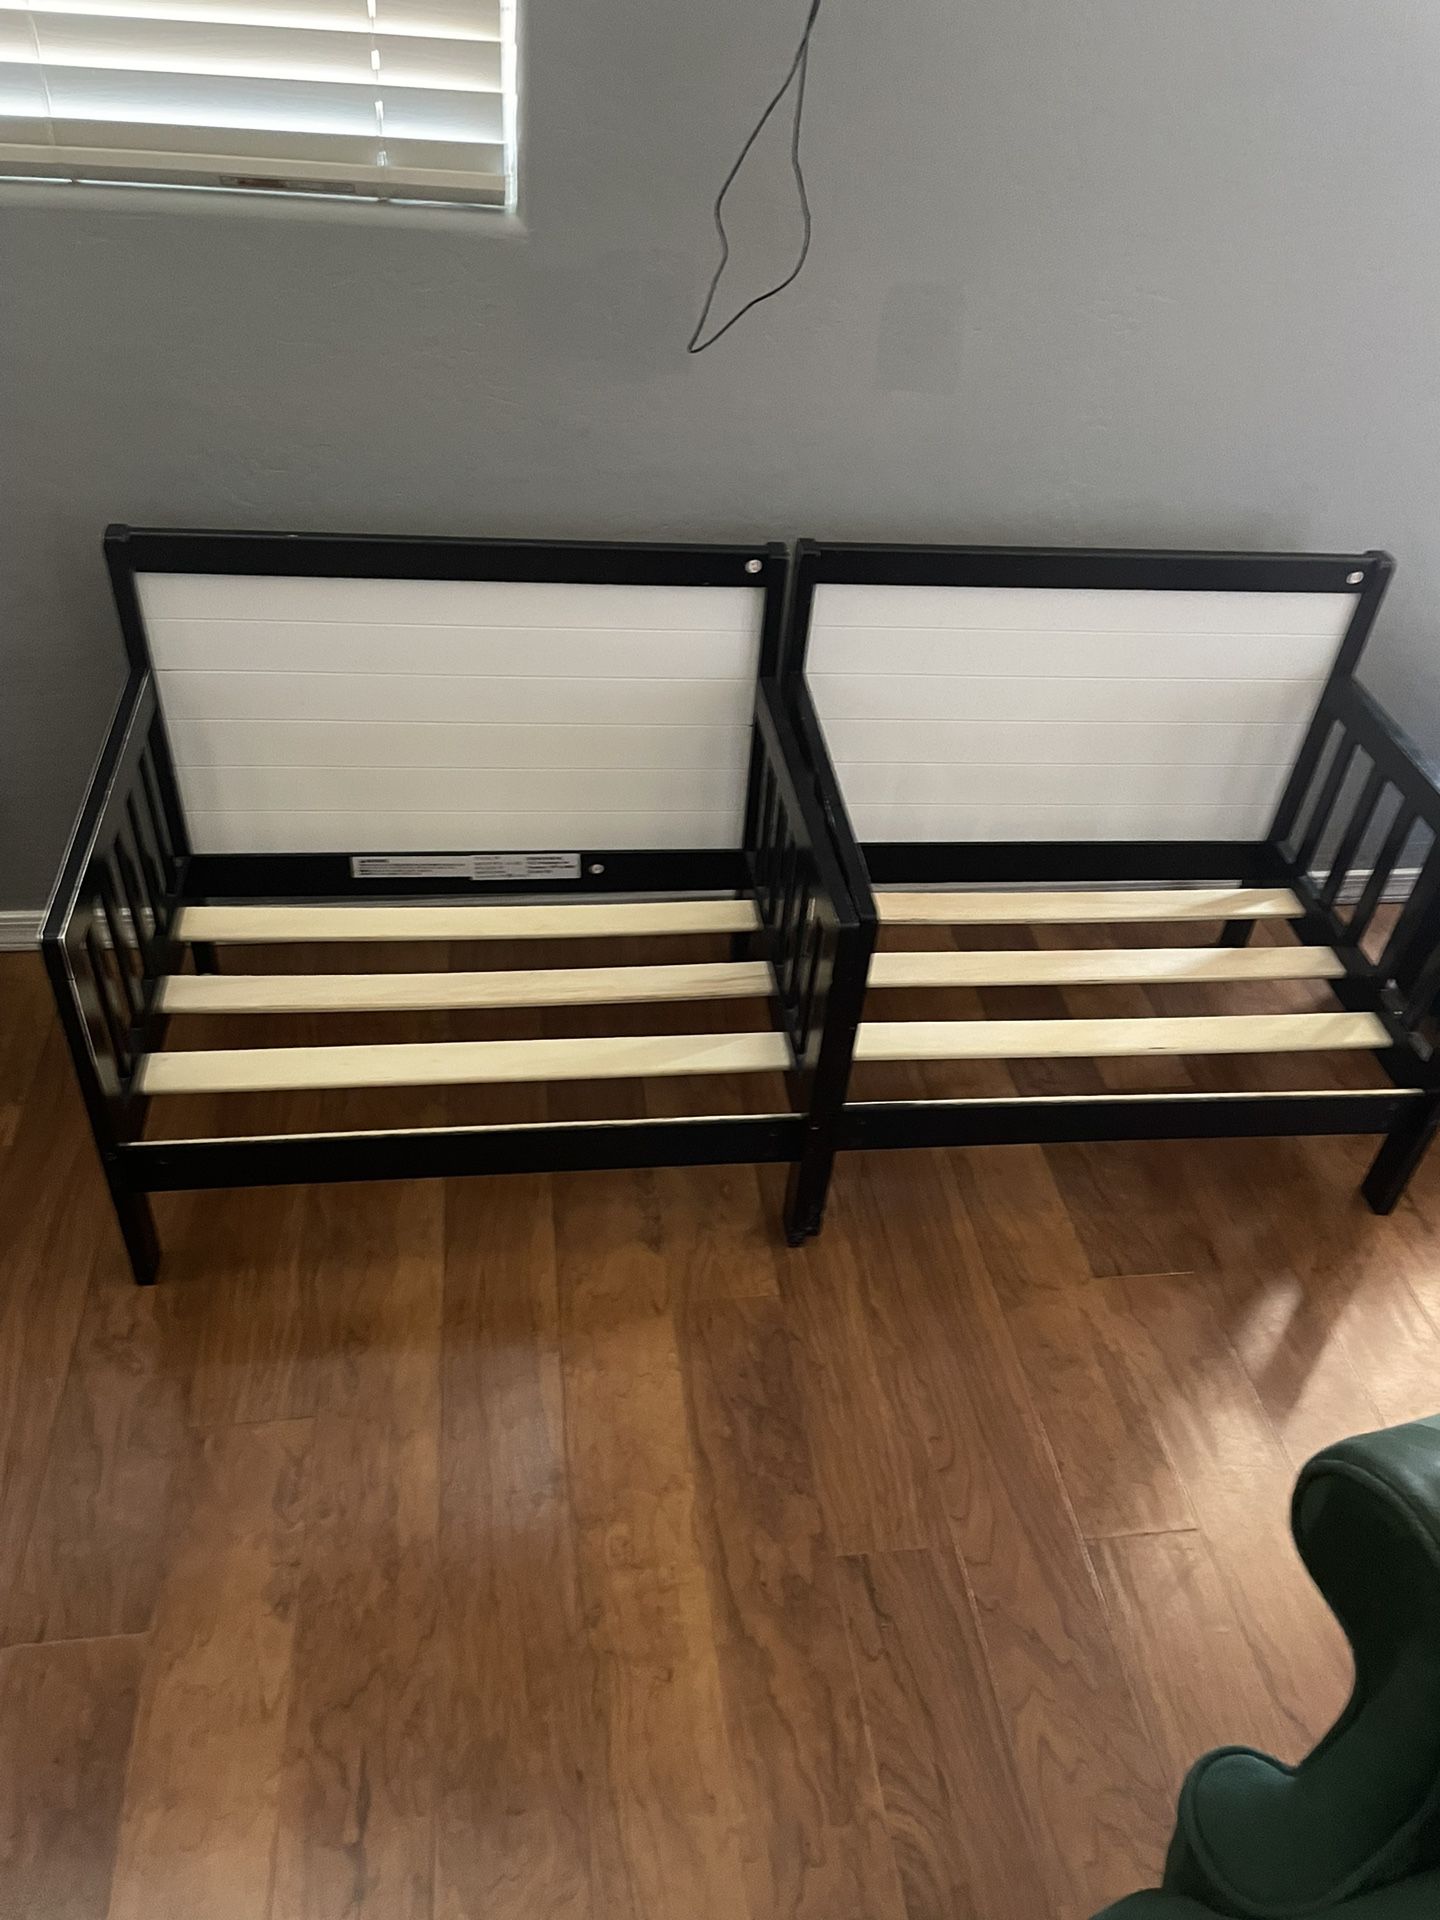 Toddler Bed Turn Into 2 Chairs